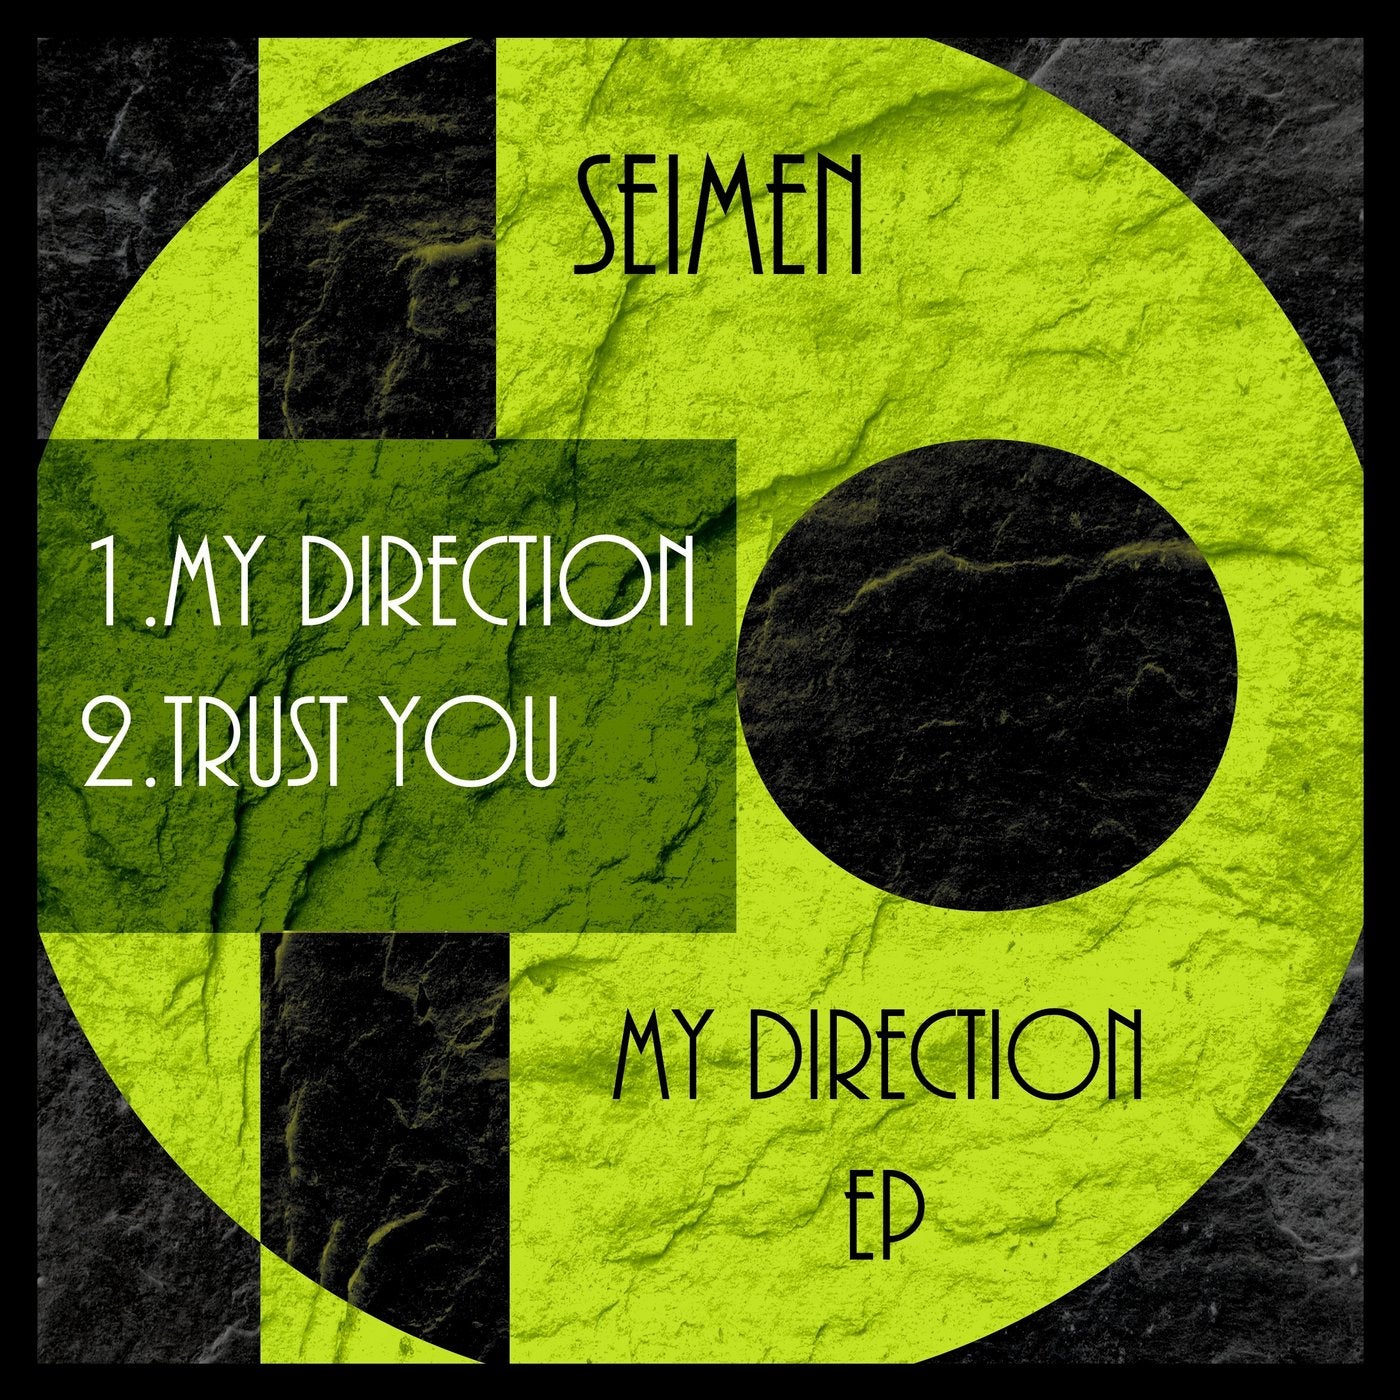 My Direction EP